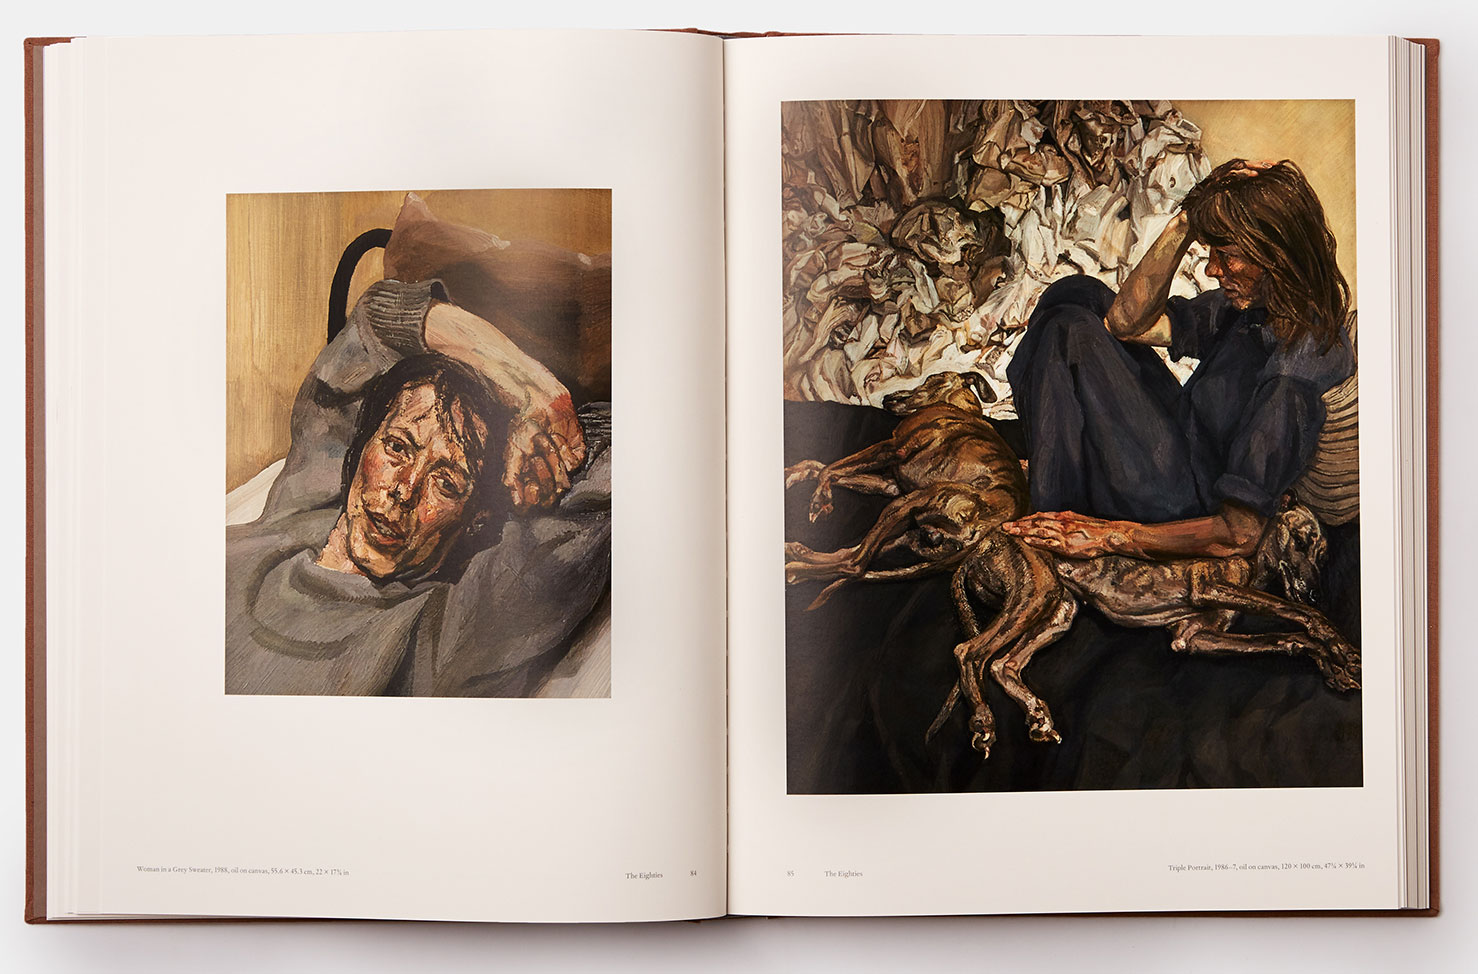 A spread from volume two of our Lucian Freud book, featuring Triple Portrait (right, 1986–7), one of Freud's human and animal portraits